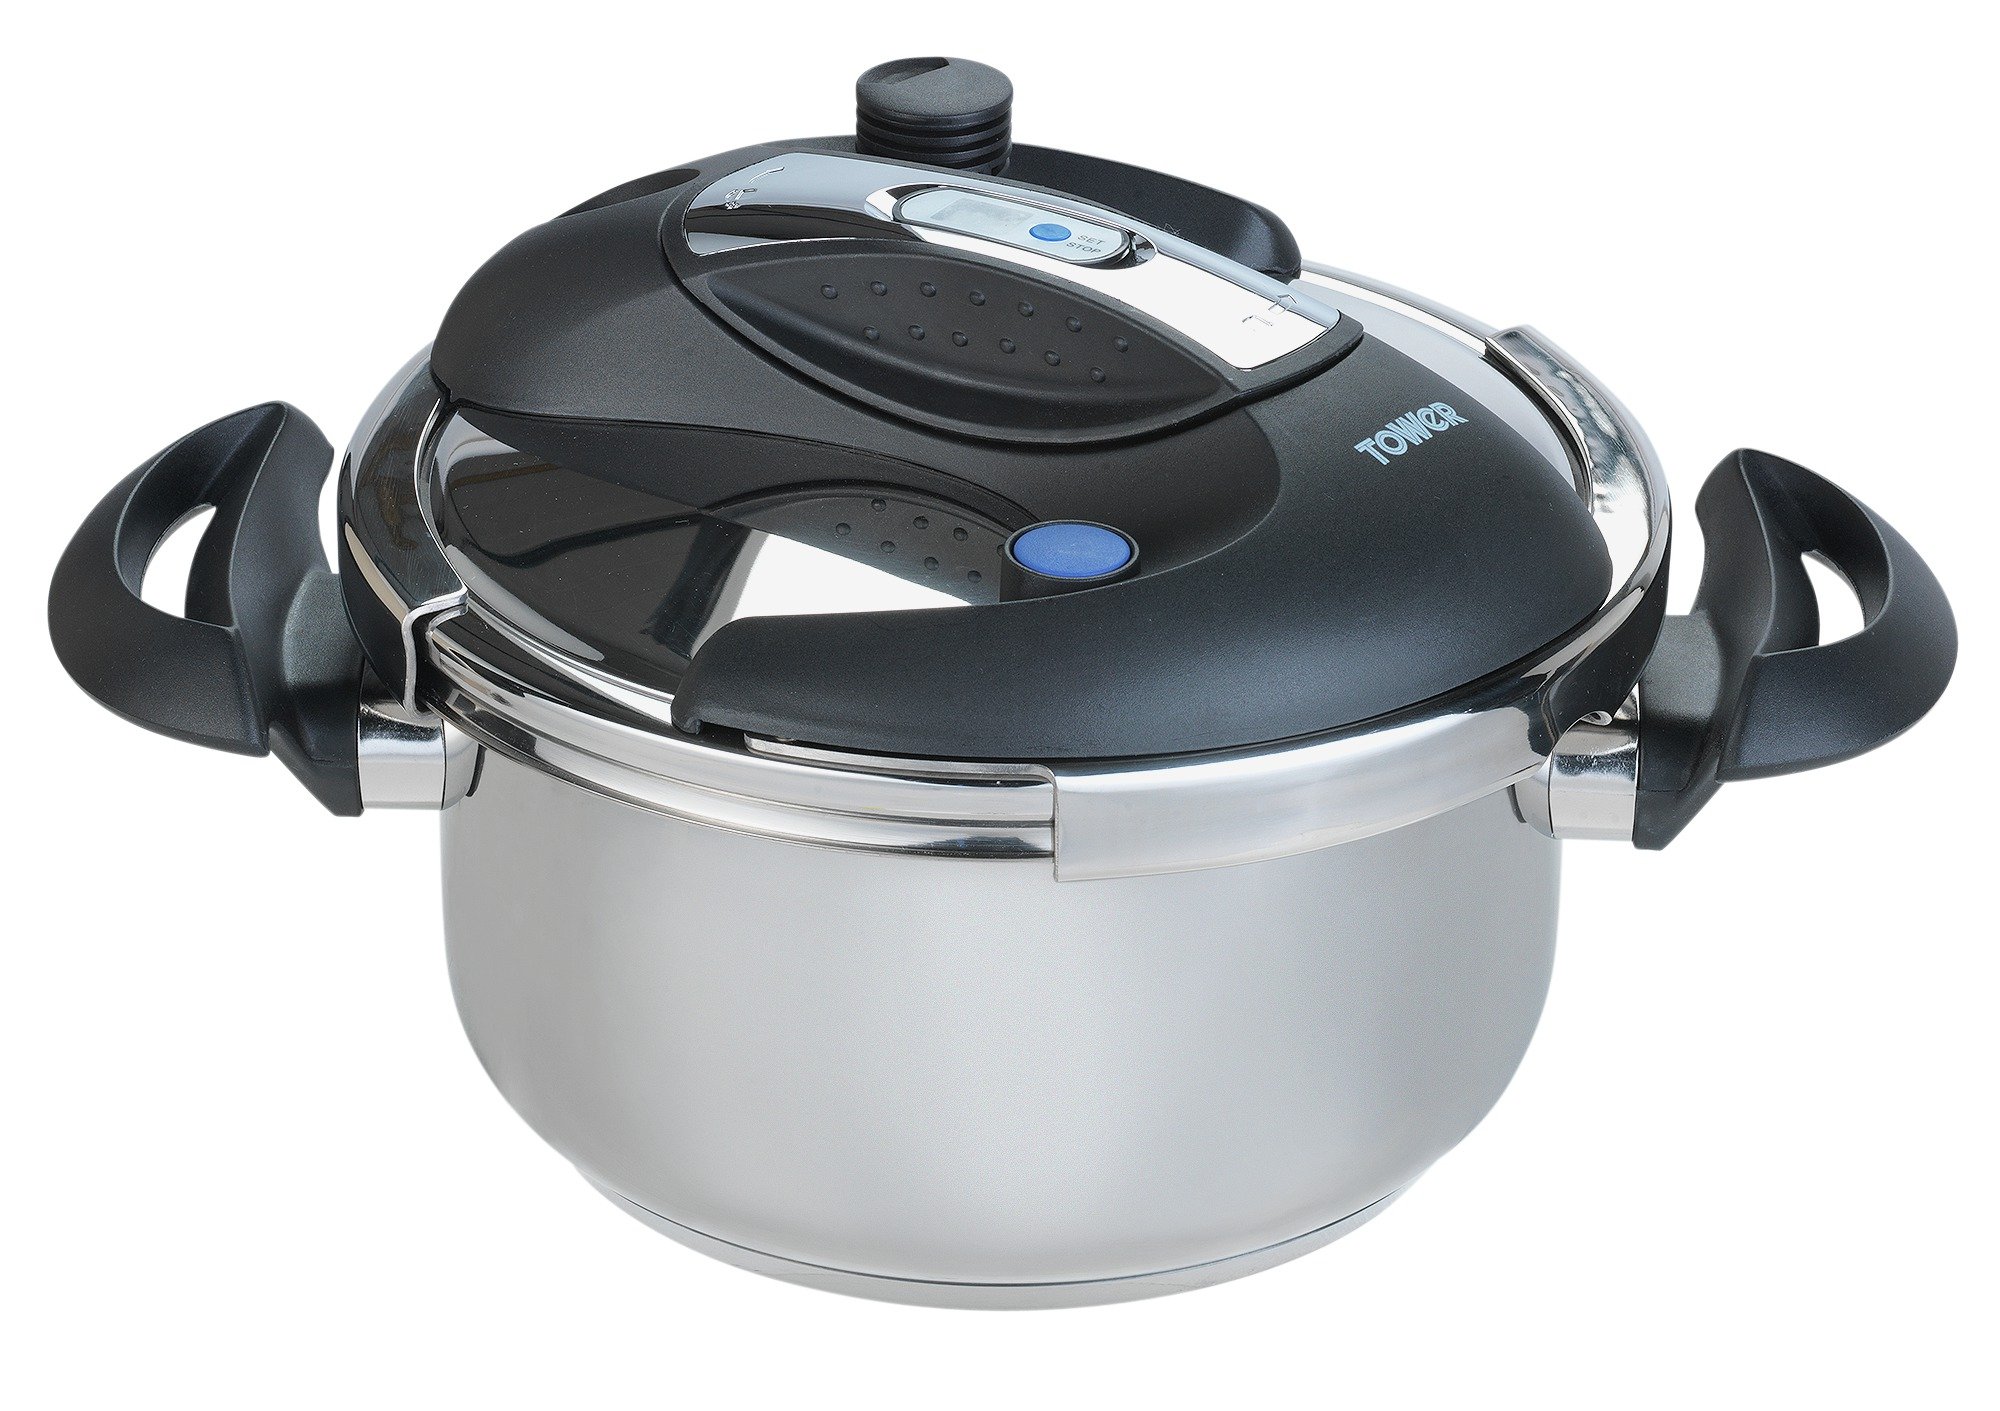 Tower Pro 4 Litre One Touch Pressure Cooker review